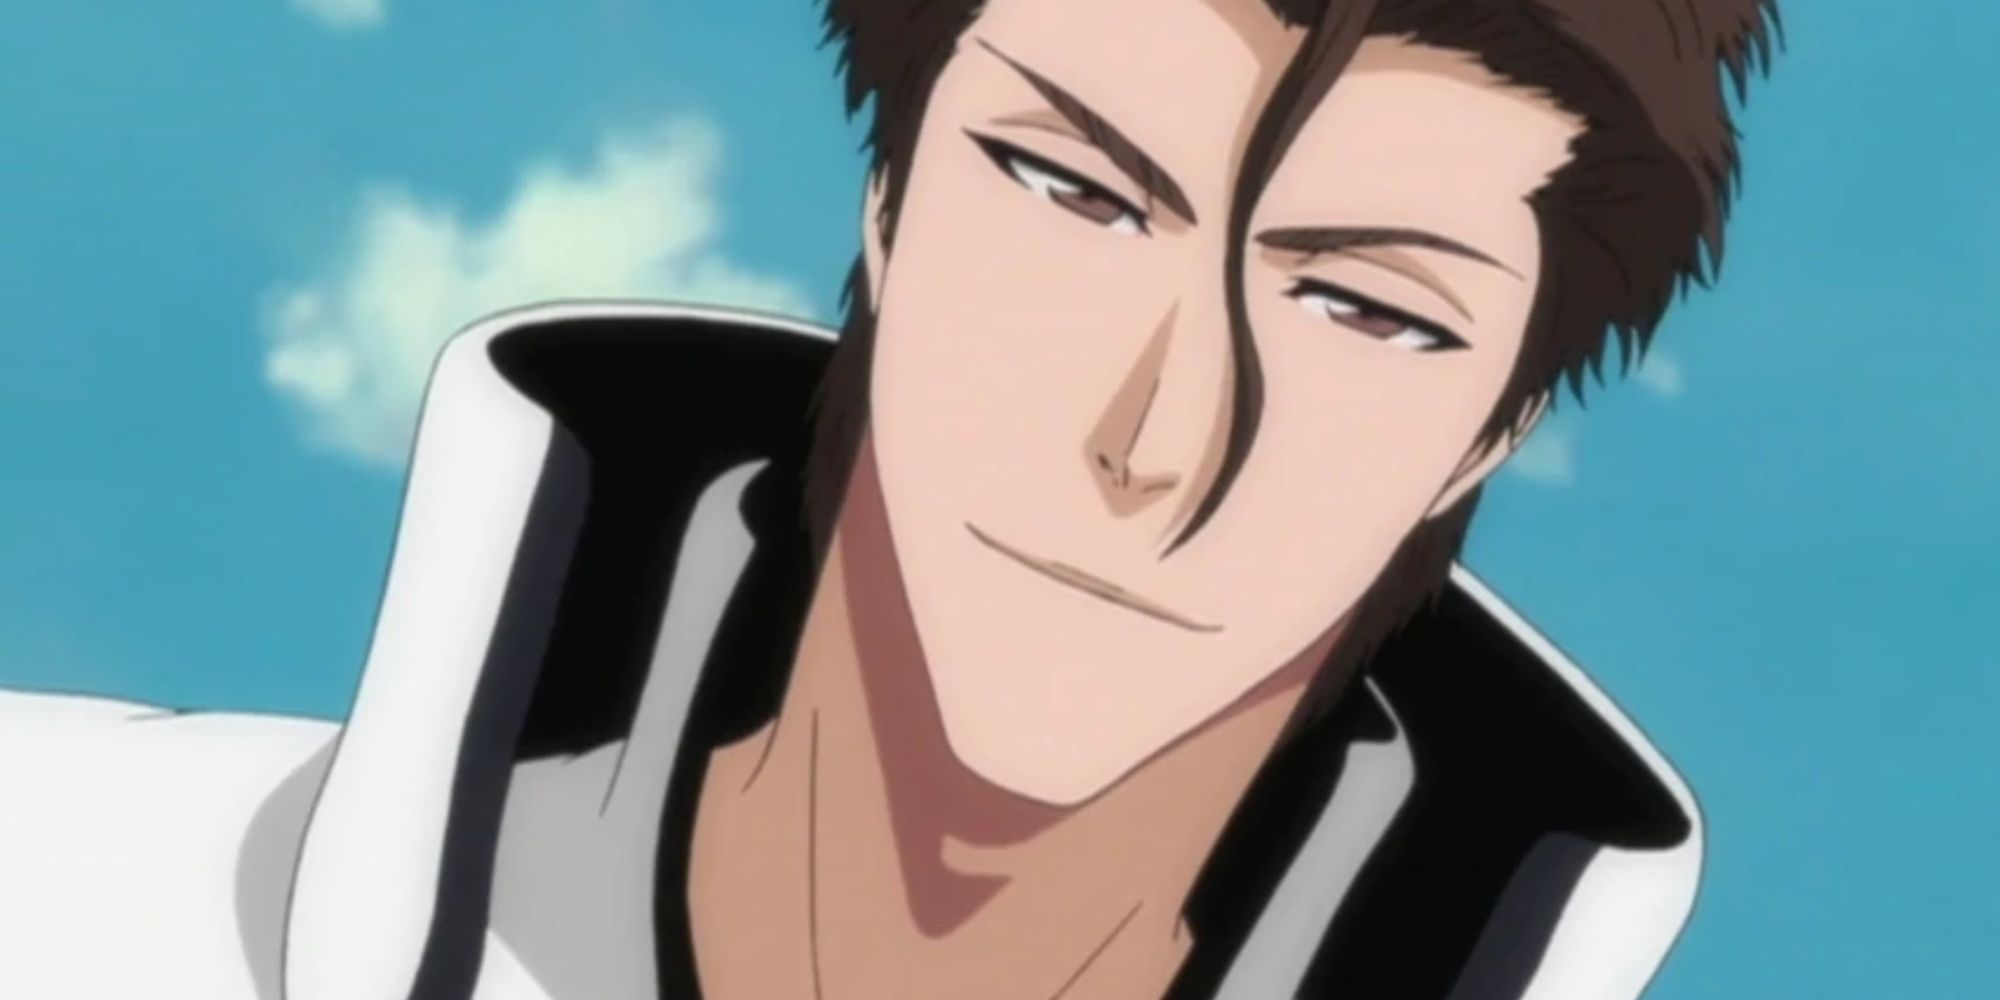 Sosuke Aizen is one of the smartest anime villains